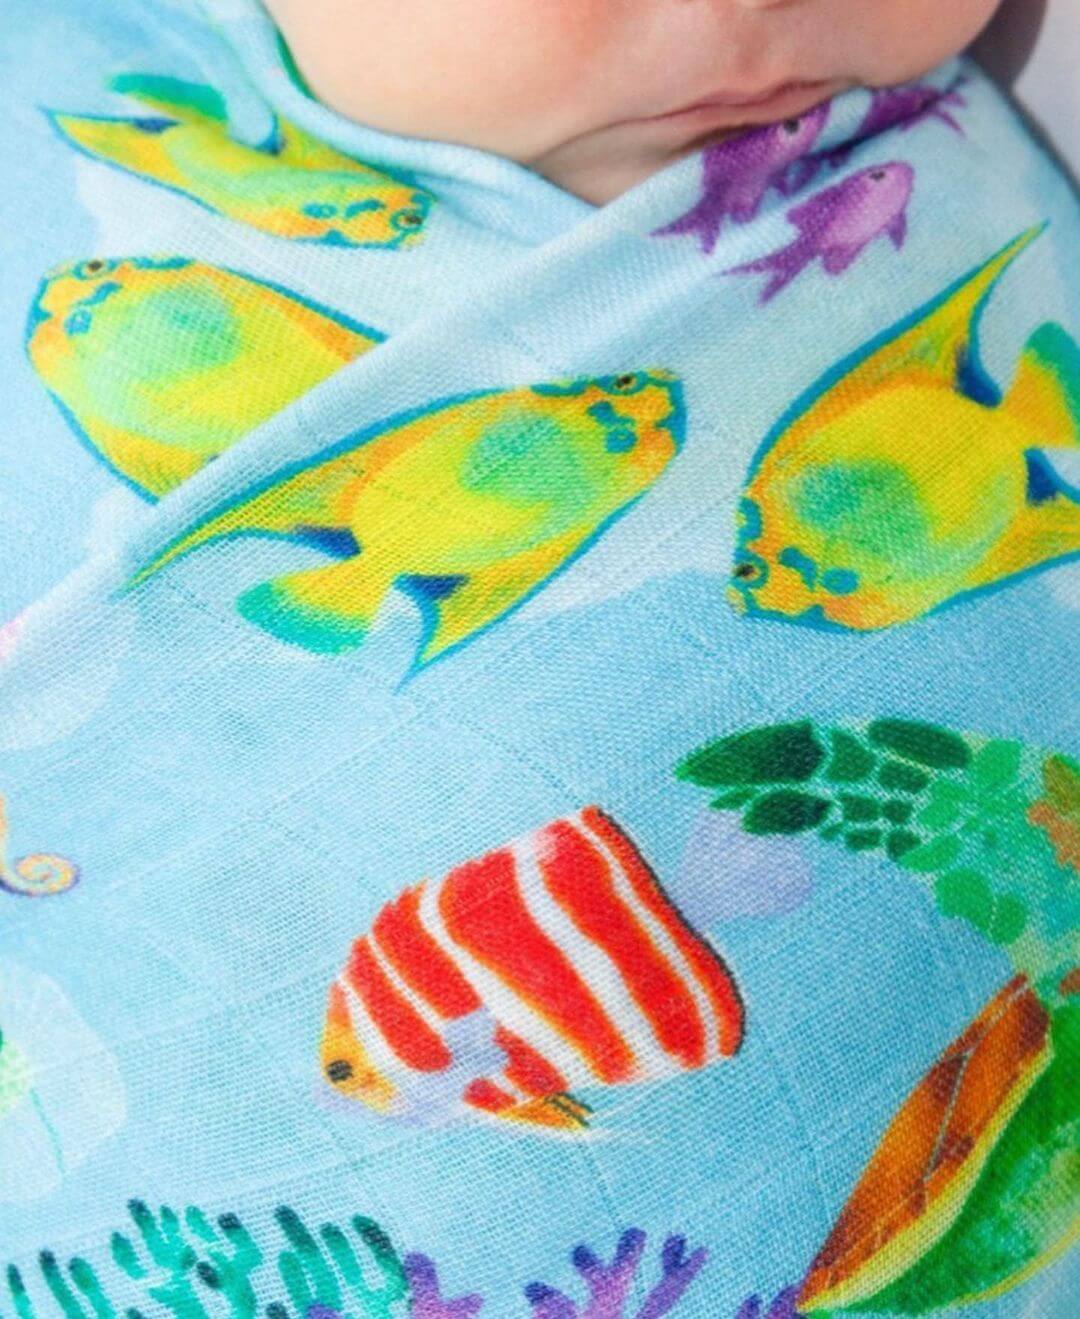 Baby wrapped in blue fabric with tropical fish watercolour painting designed on the fabric.